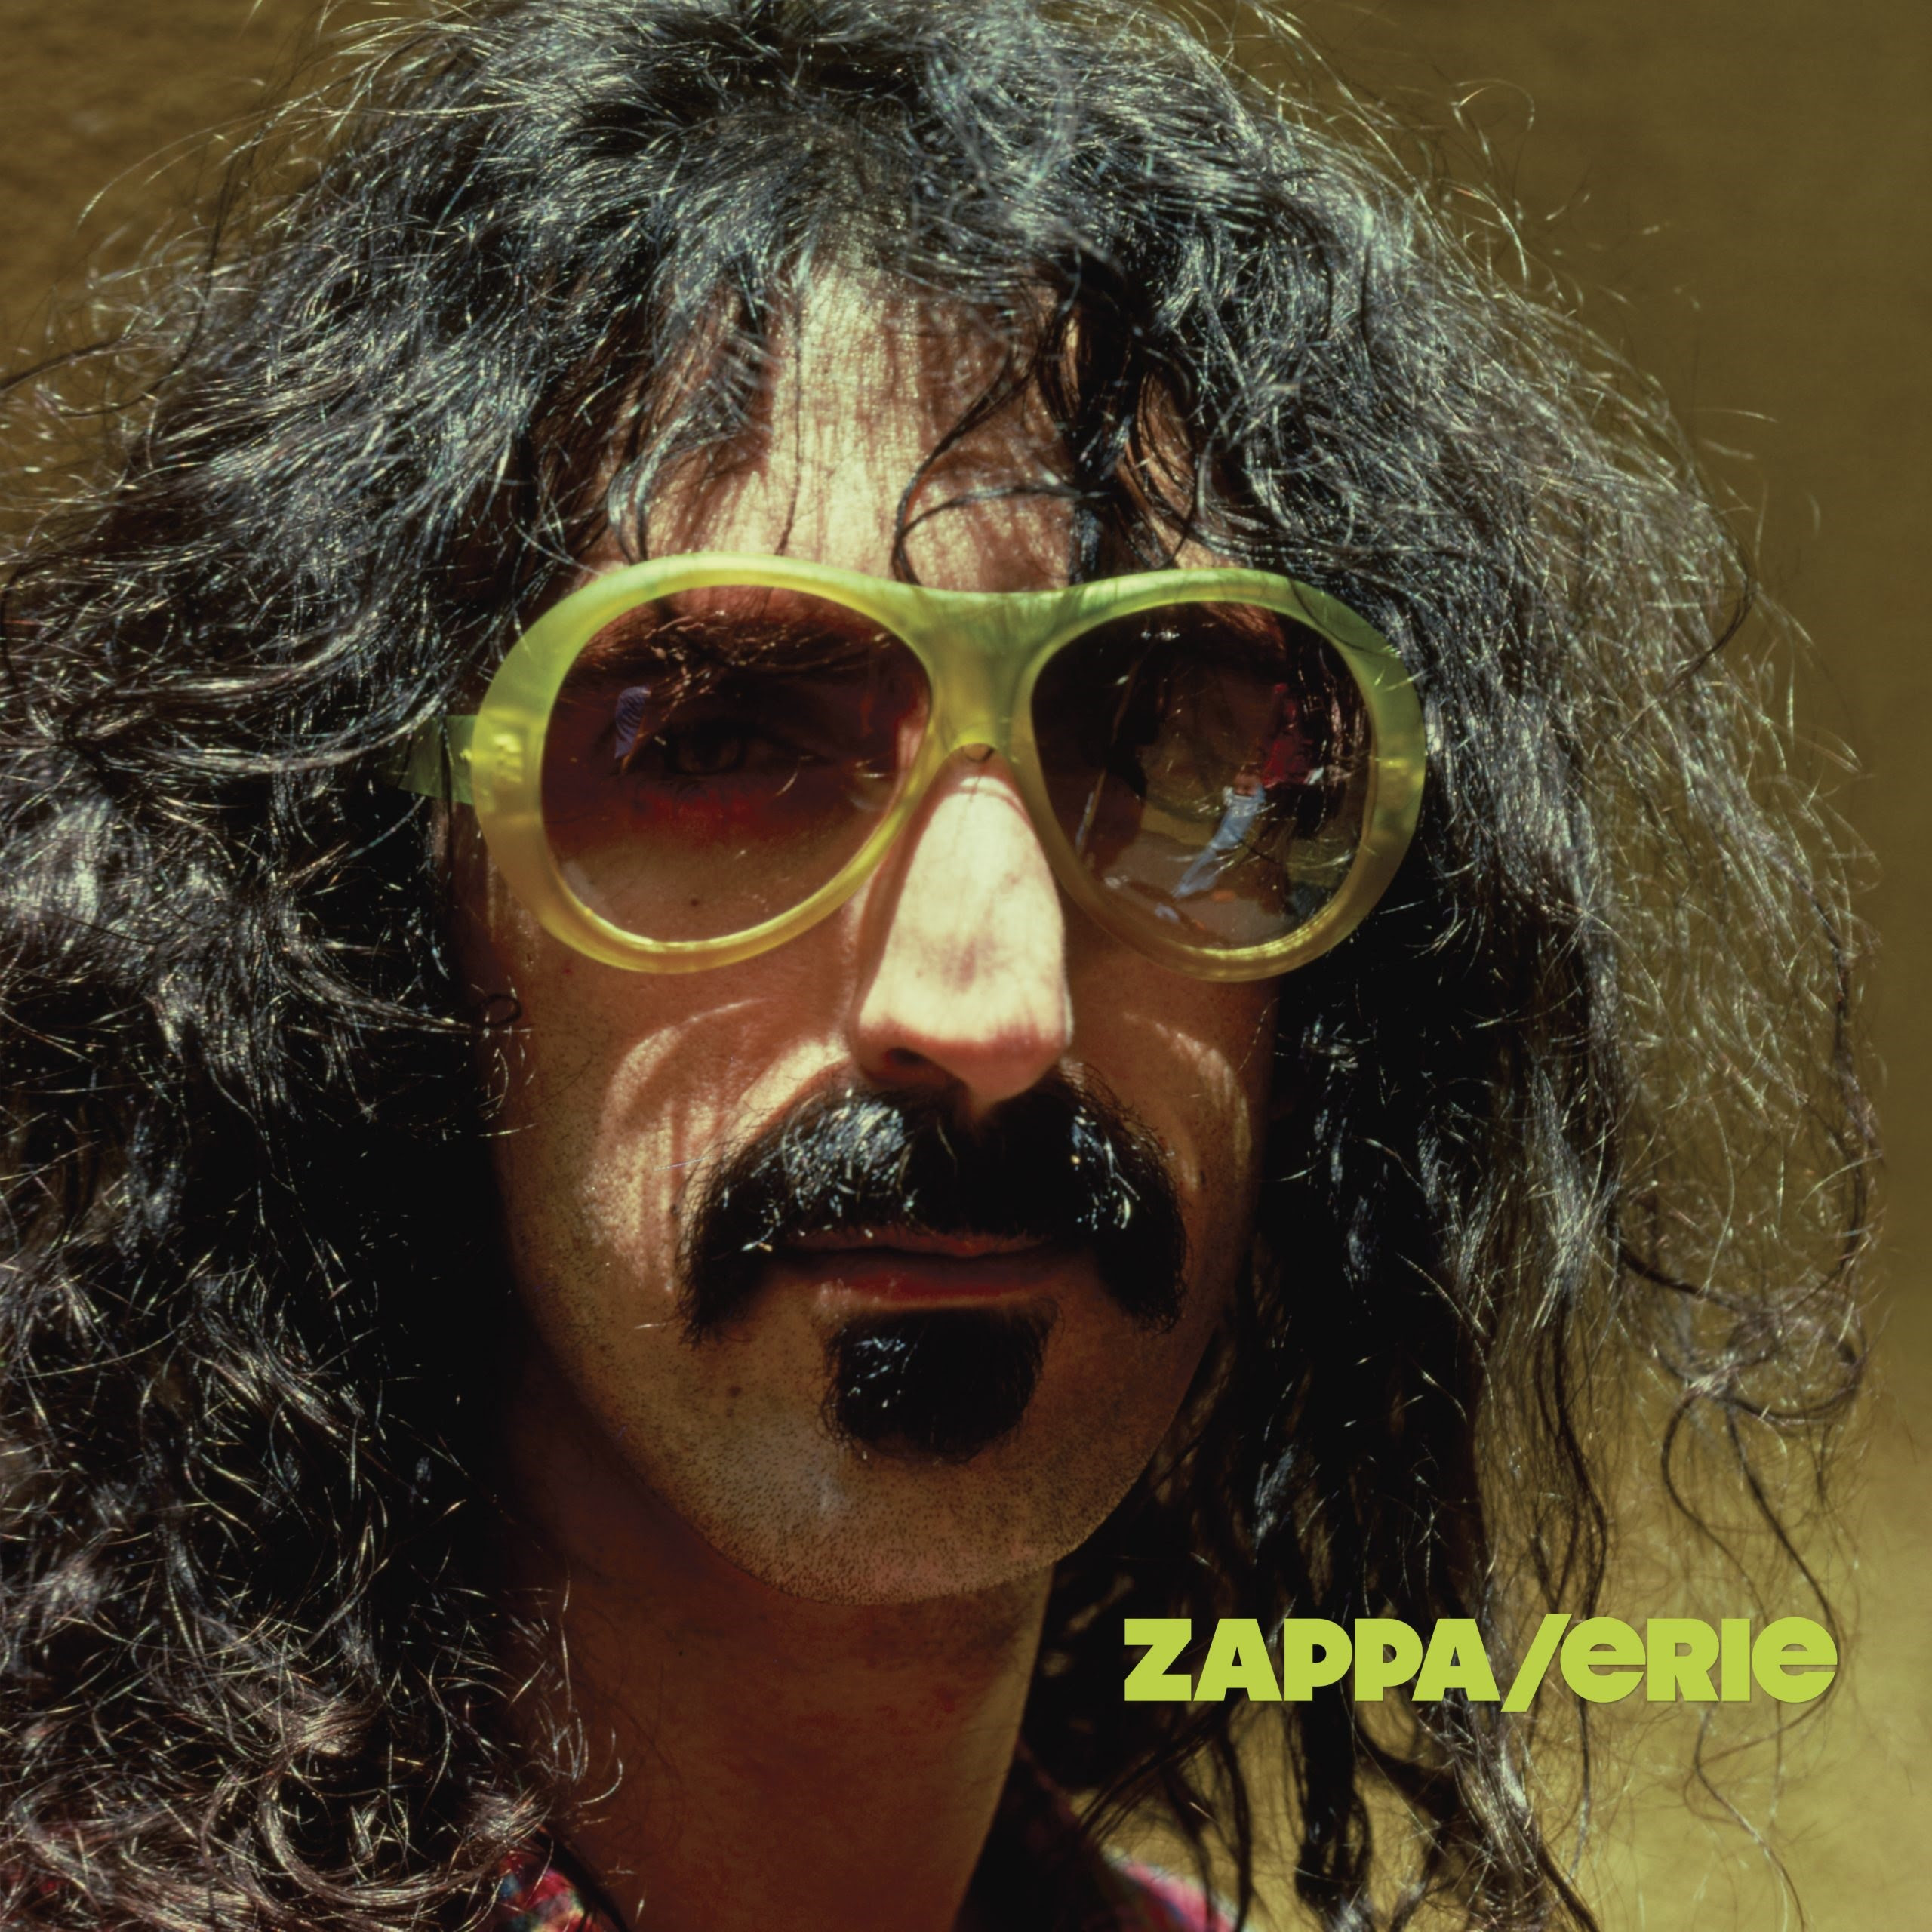 New Frank Zappa Boxed Set, "Zappa/Erie," Out Now